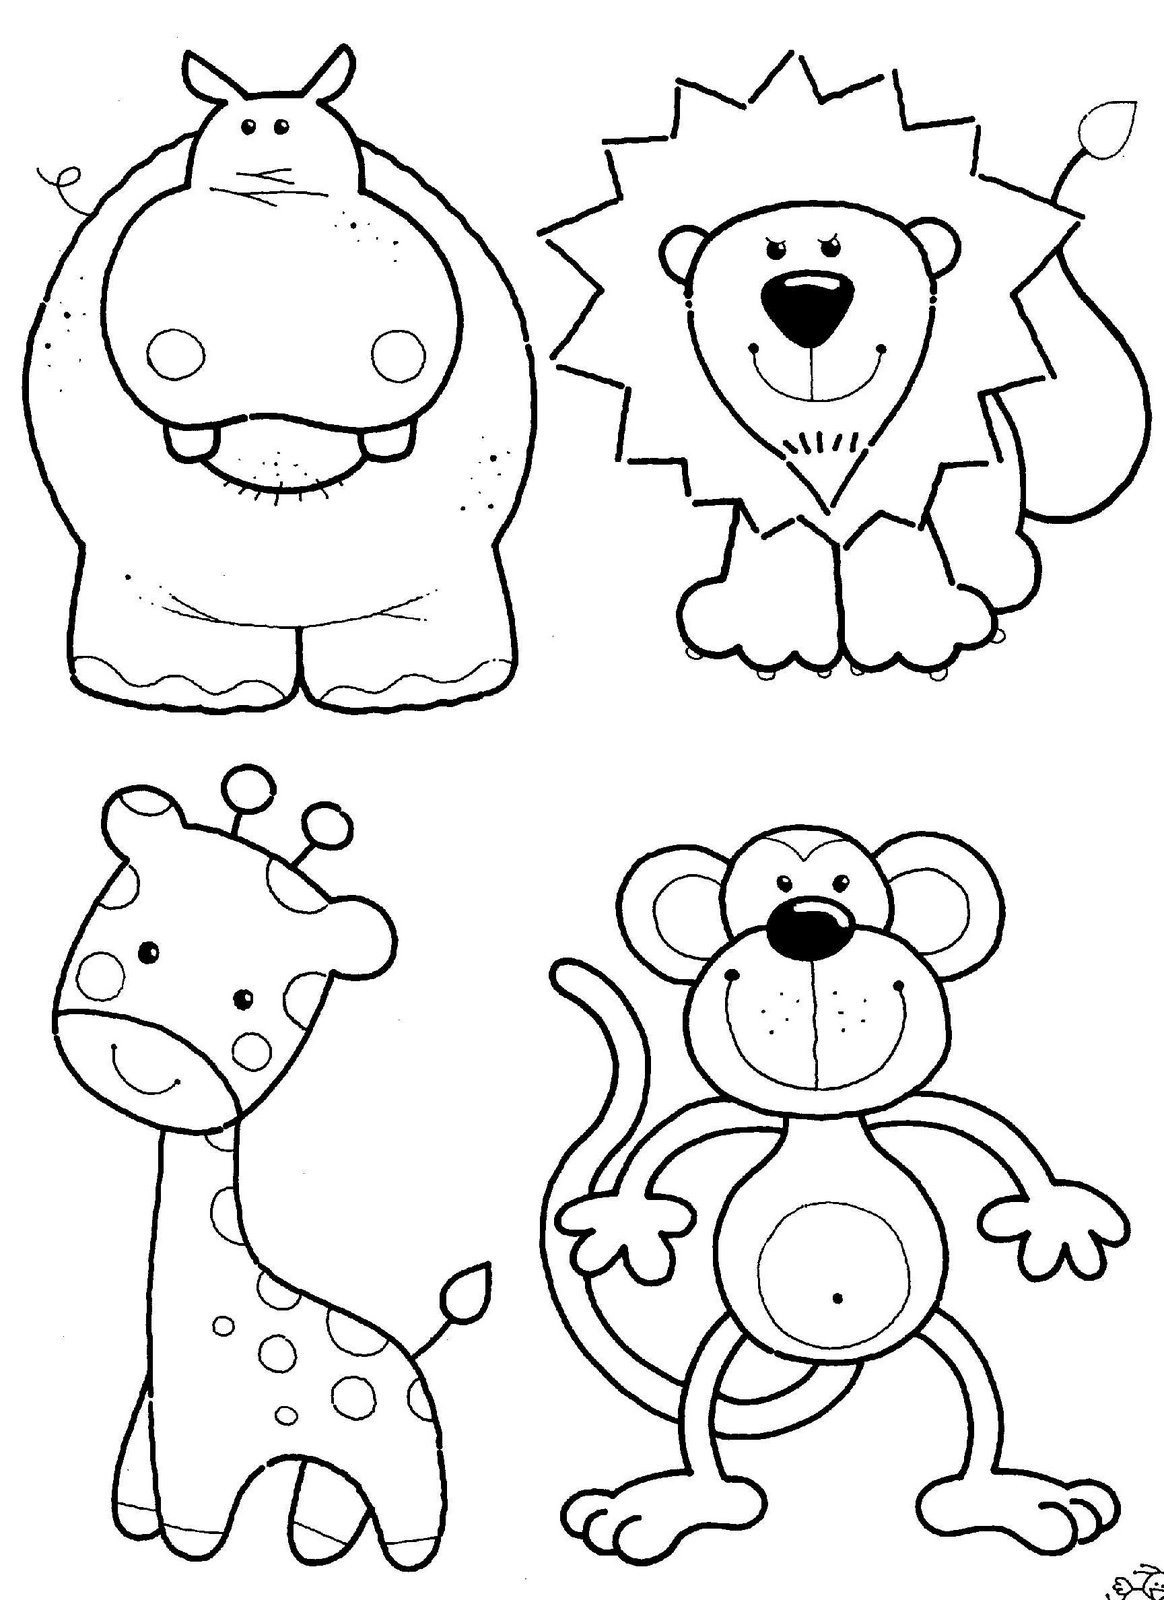 Printable Animal Coloring Pages
 Noah s Ark Preschool Lesson for 2 Year Olds